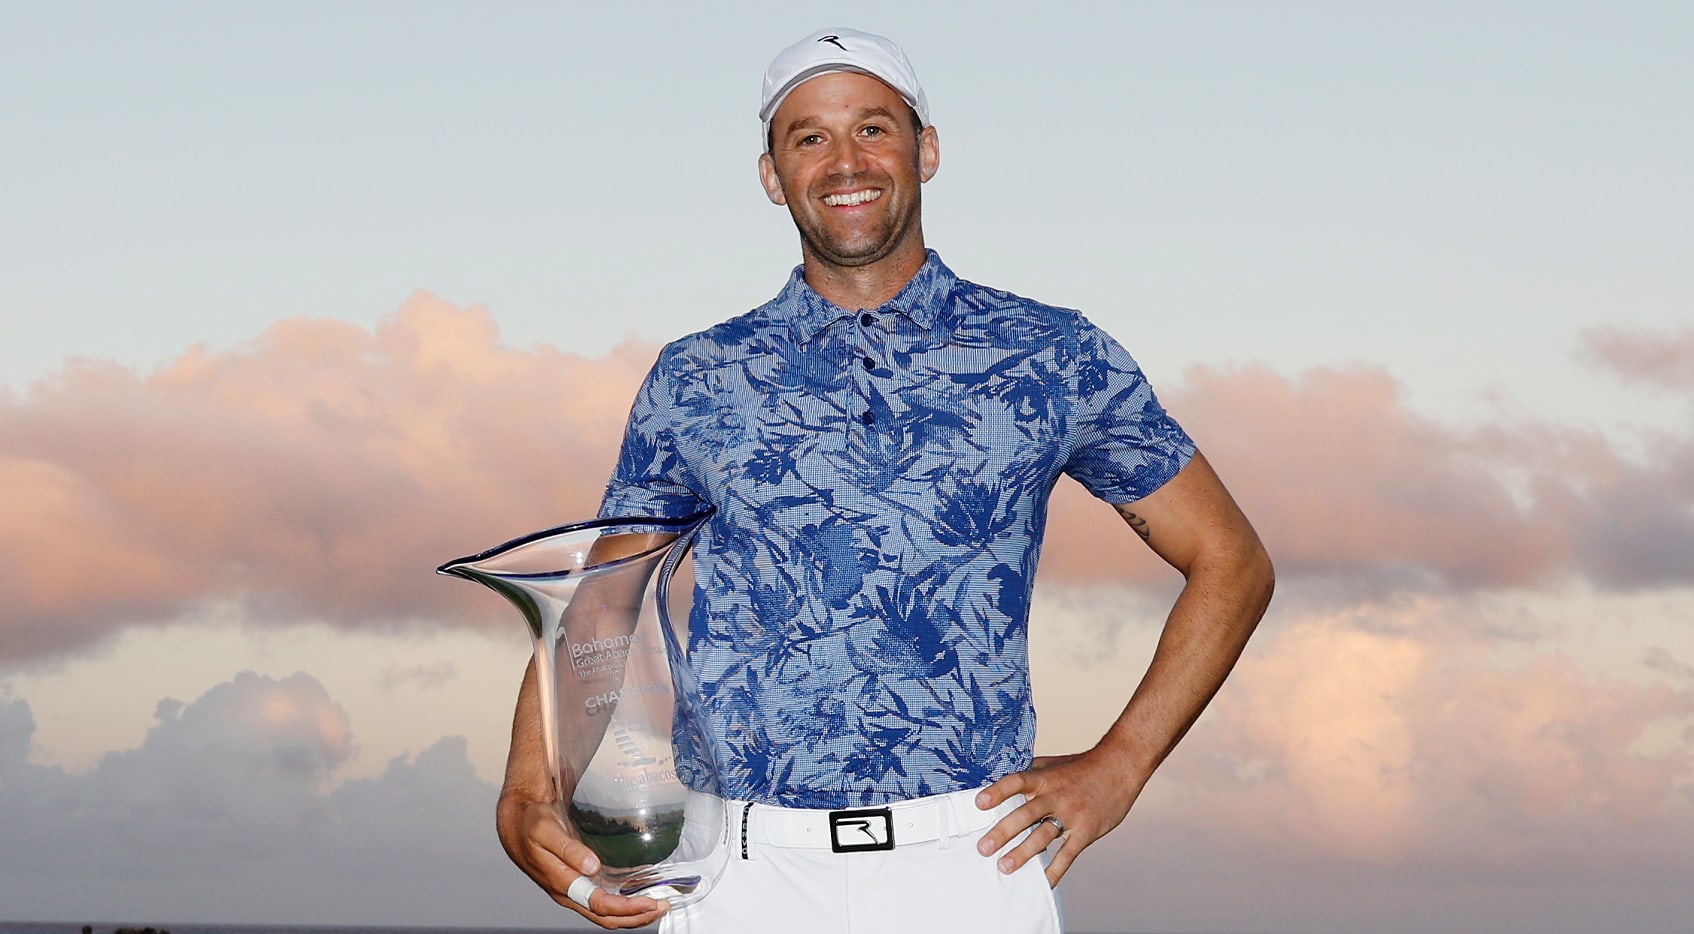 Sponsor exemption Ben Silverman earns second Korn Ferry Tour victory at